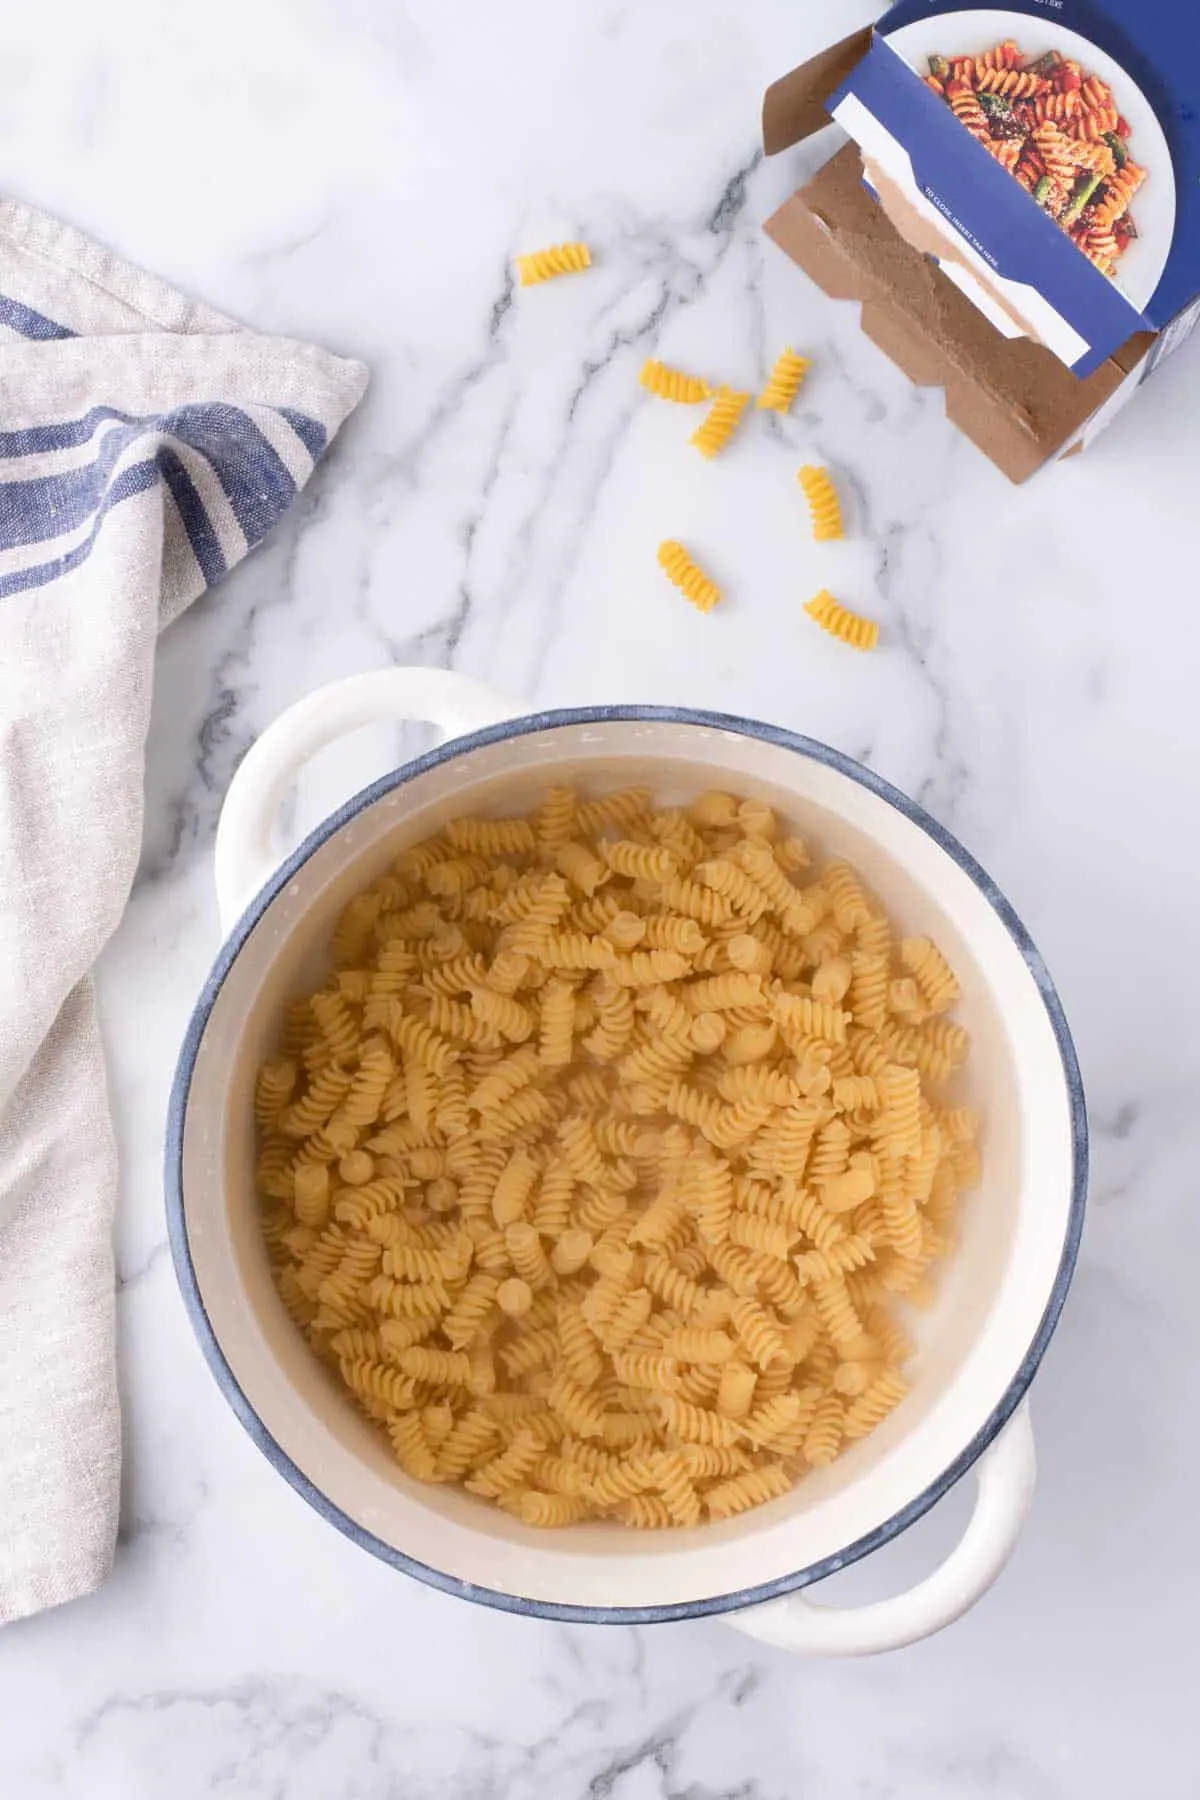 rotini noodles cooking in a pot of boiling water